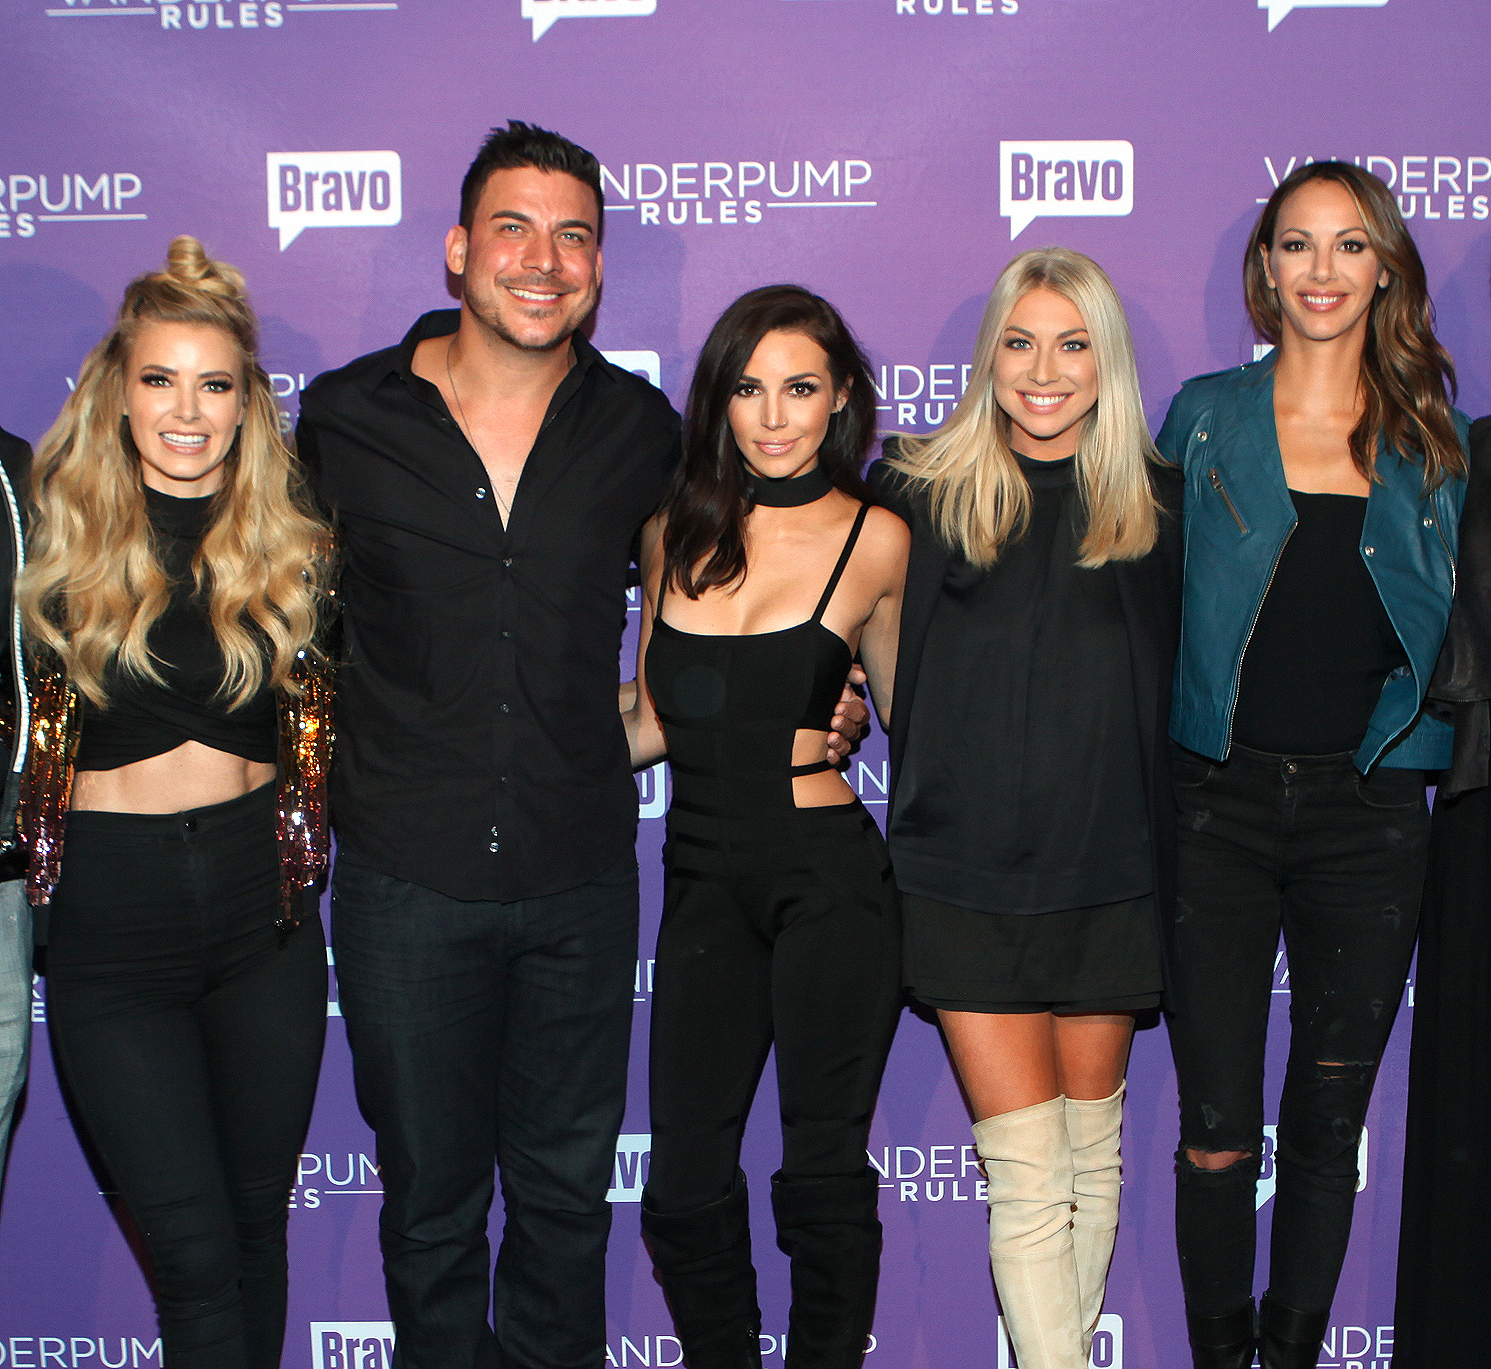 how much do the stars of vanderpump rules make